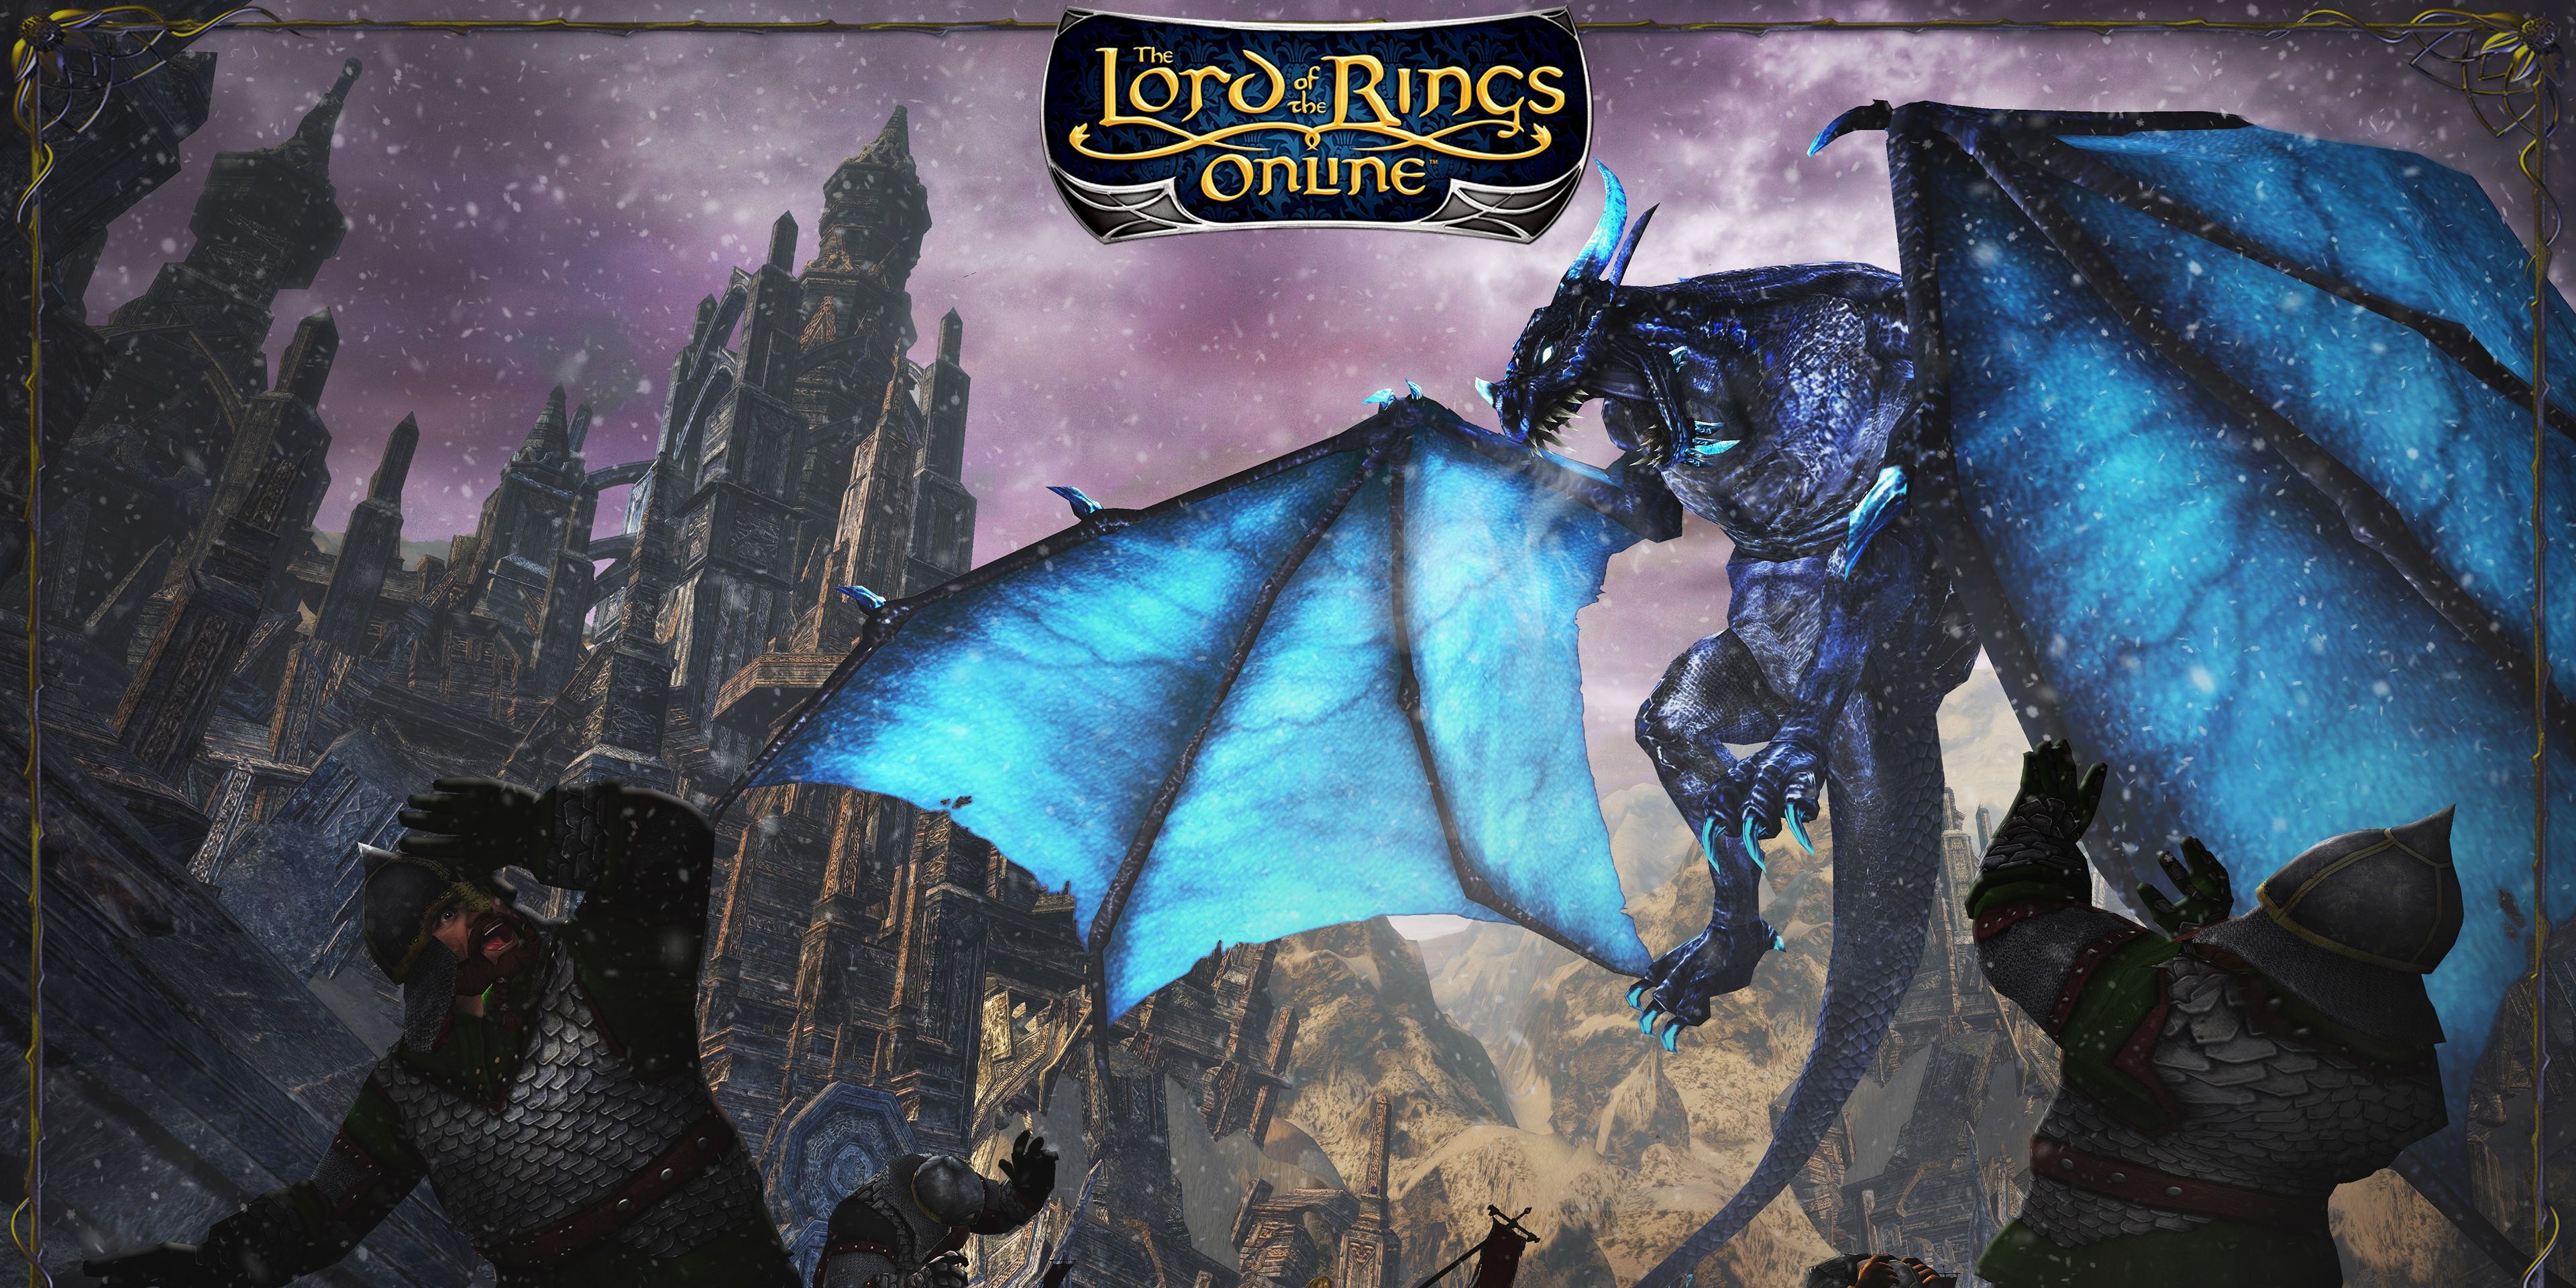 A blue dragon attacks the Dwarves in Lord of the Rings Online / LOTRO